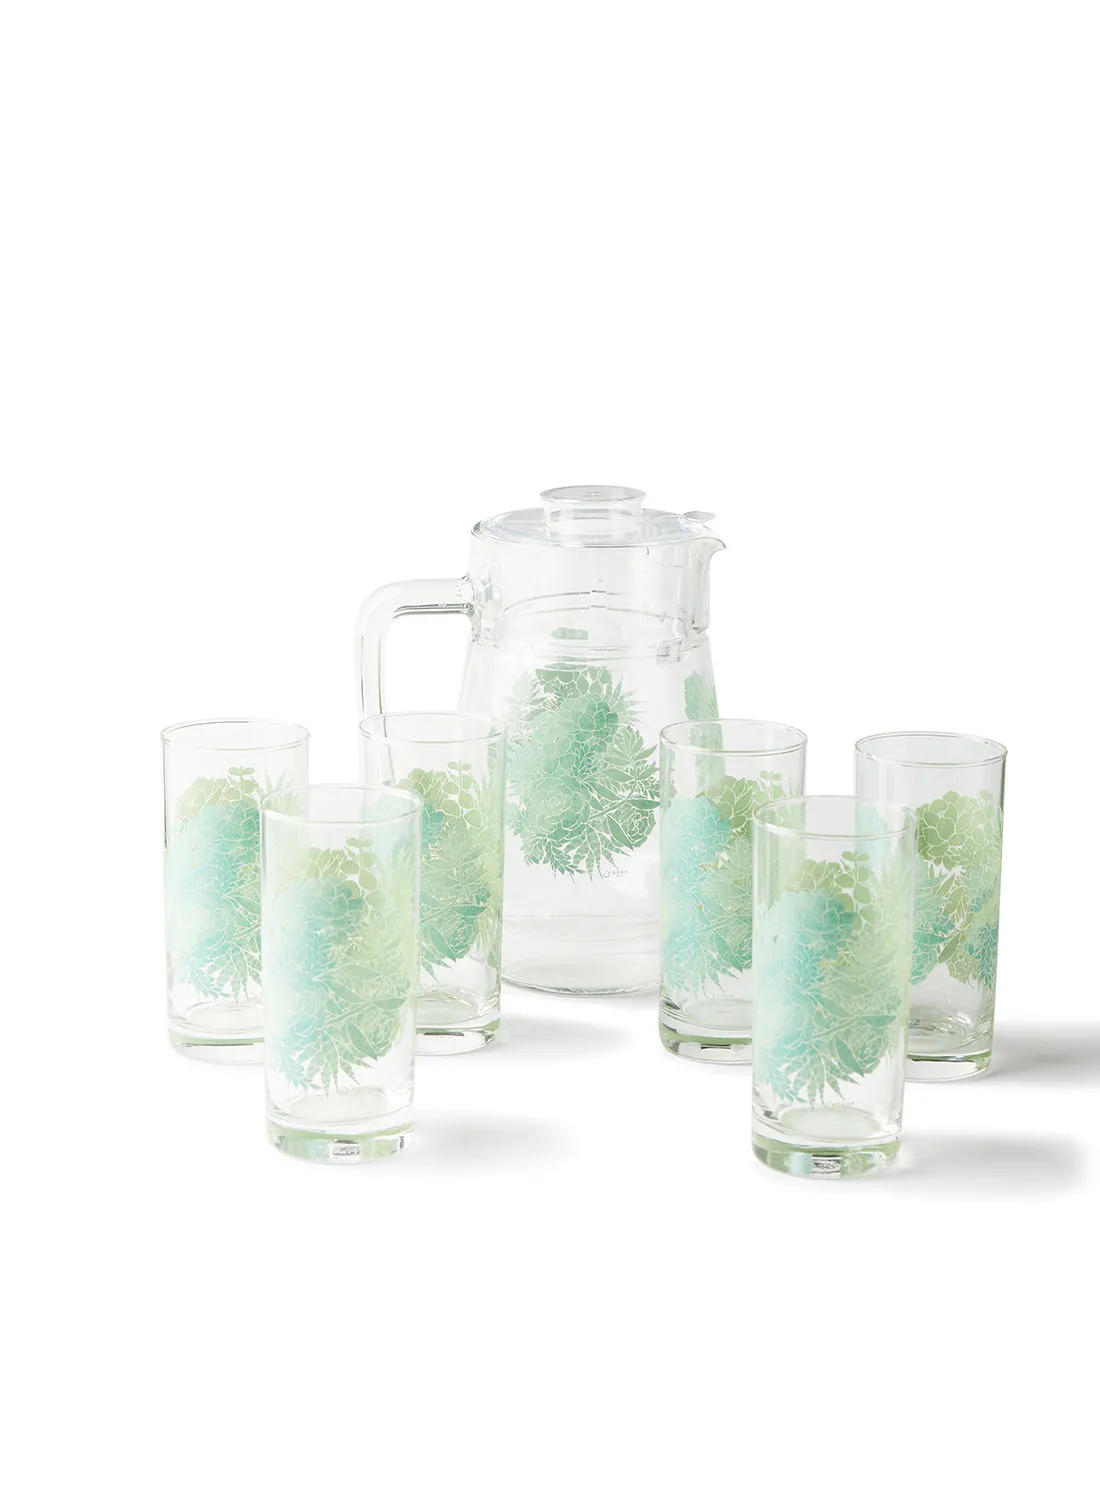 noon east 7 Piece Glass Drink Set Beverage Glasses For Juices - By Noon East - Jug 1.6 L, Tumblers 27 Cl - Serves 6 - Ambra